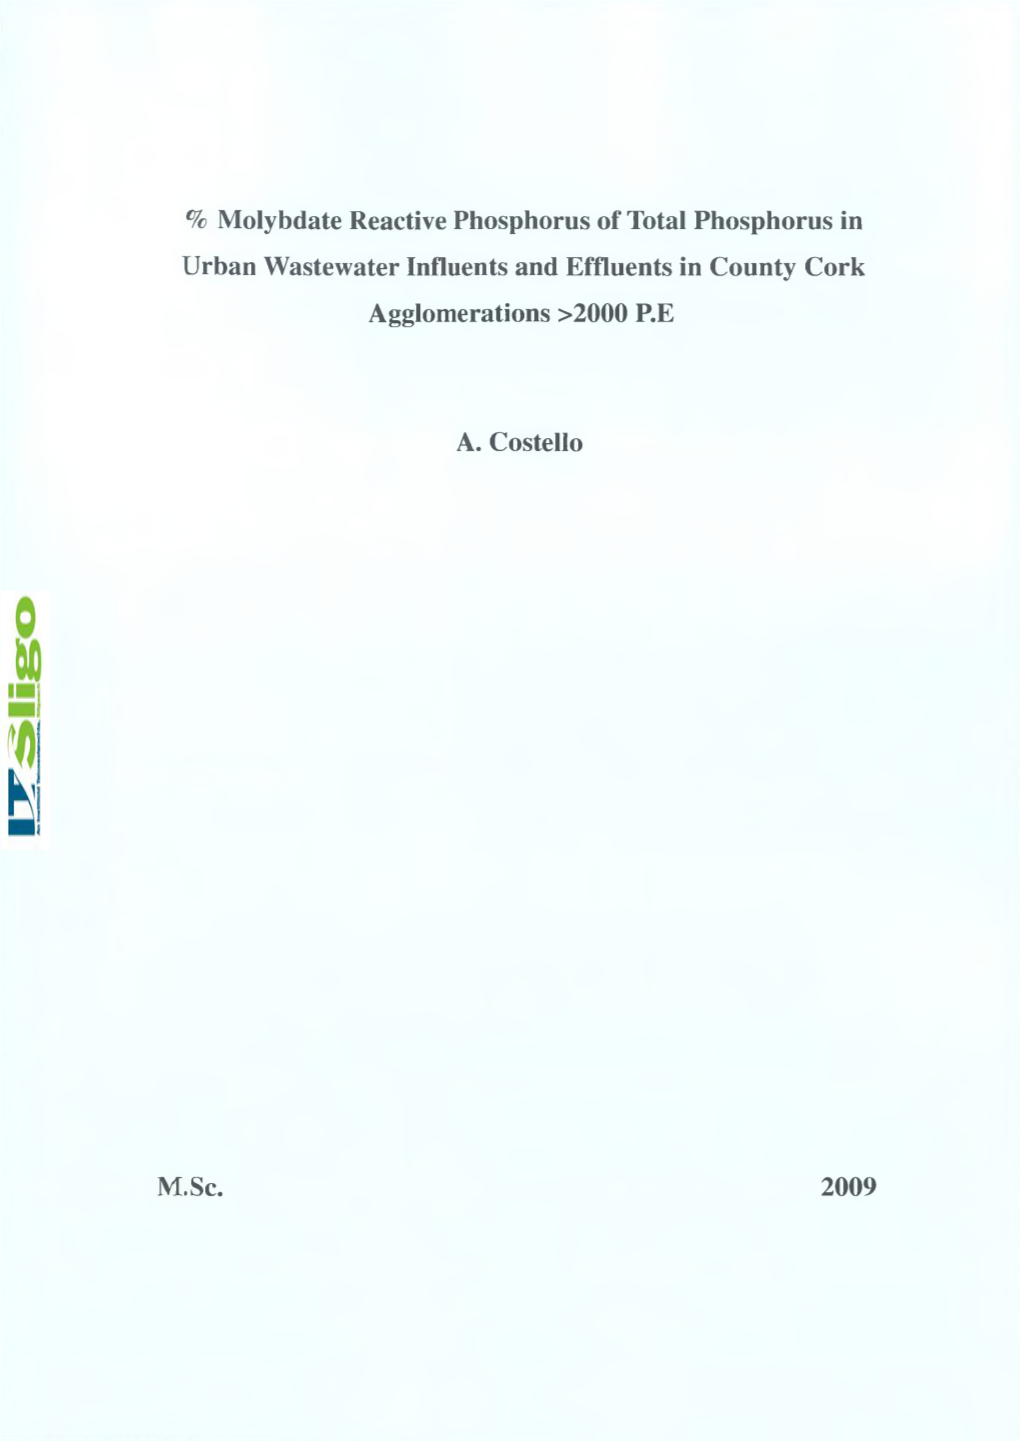 Molybdate Reactive Phosphorus of Total Phosphorus in Urban Wastewater Influents and Effluents in County Cork Agglomerations >2000 P.E